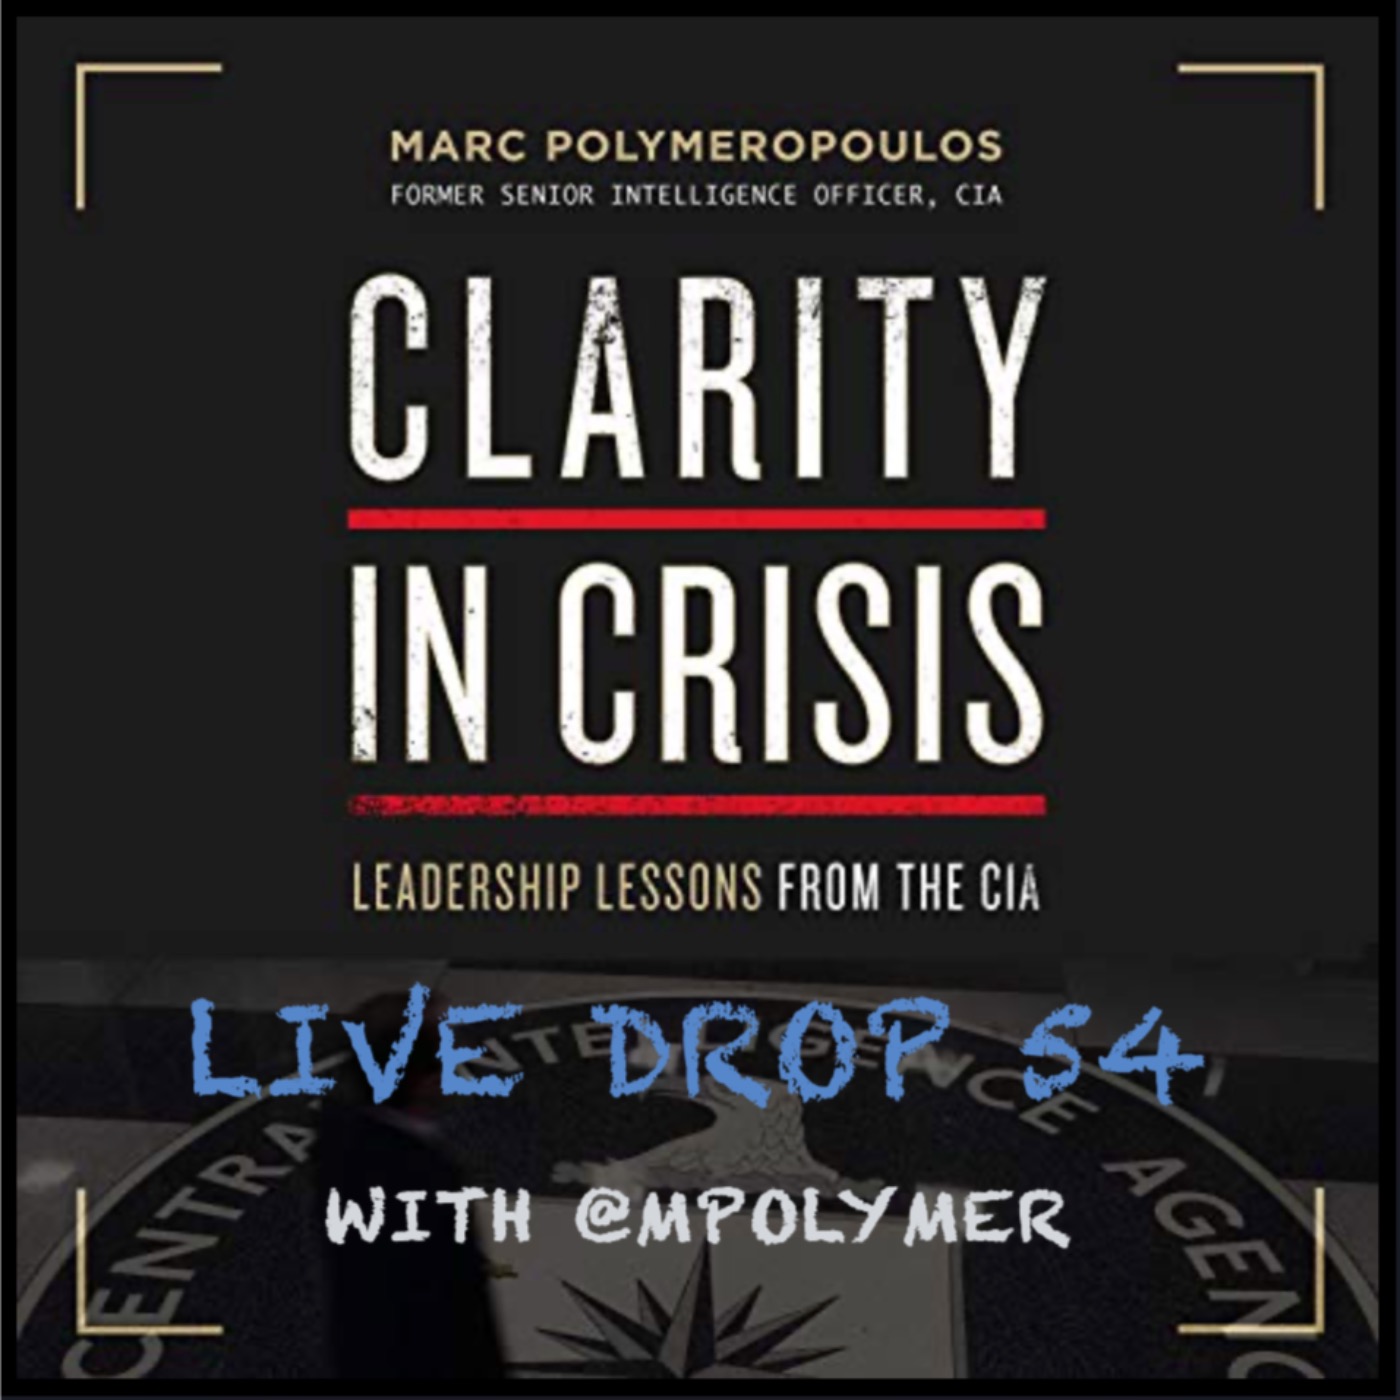 Former CIA Senior Intelligence Officer Marc Polymeropoulos Offers Clarity In Crisis